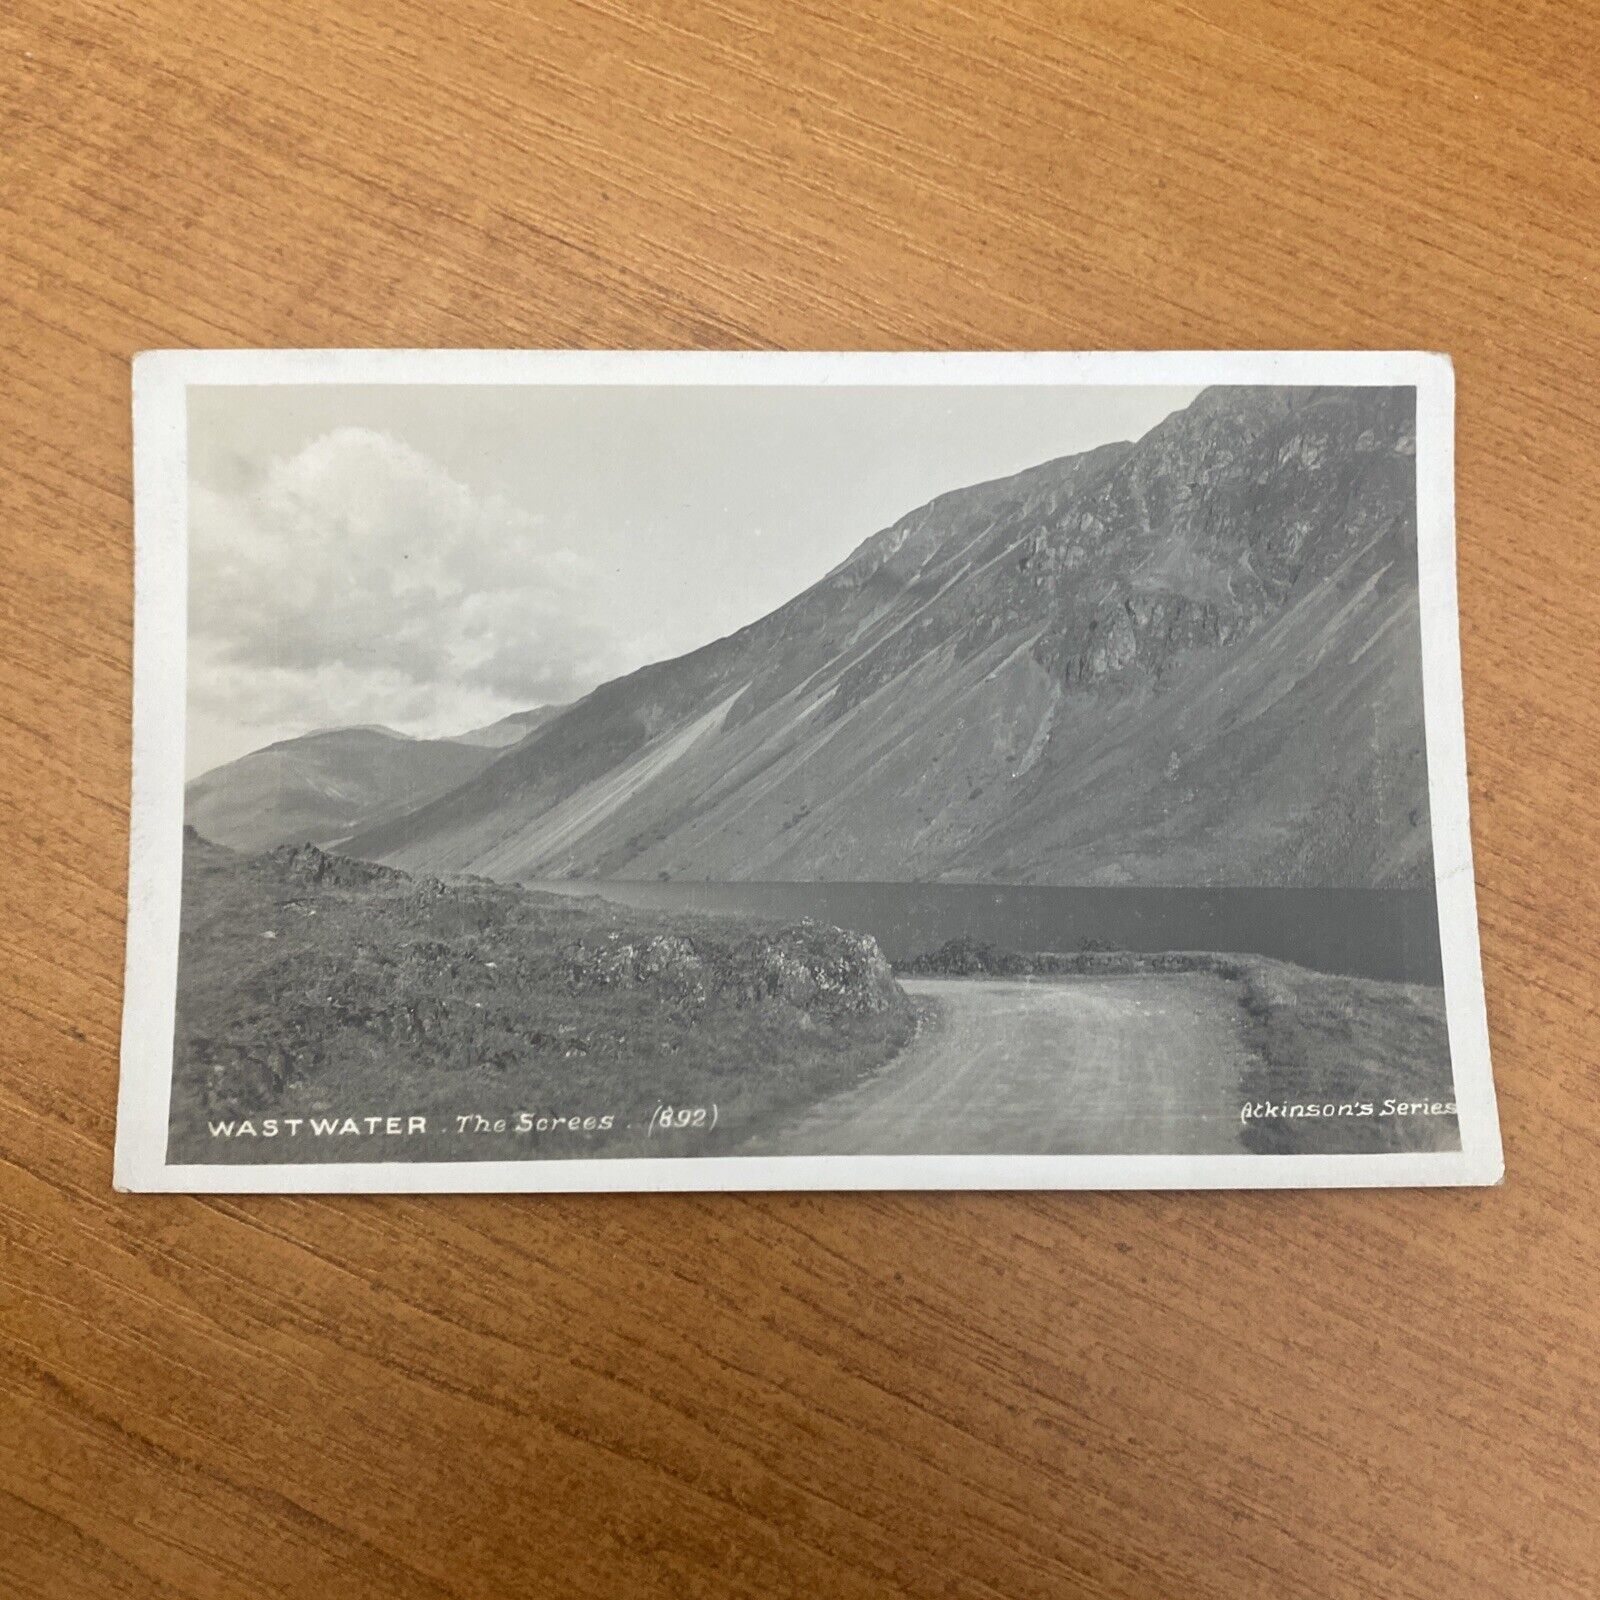 House Clearance - Atkinson Series - Wastwater, The Screes (892) Service